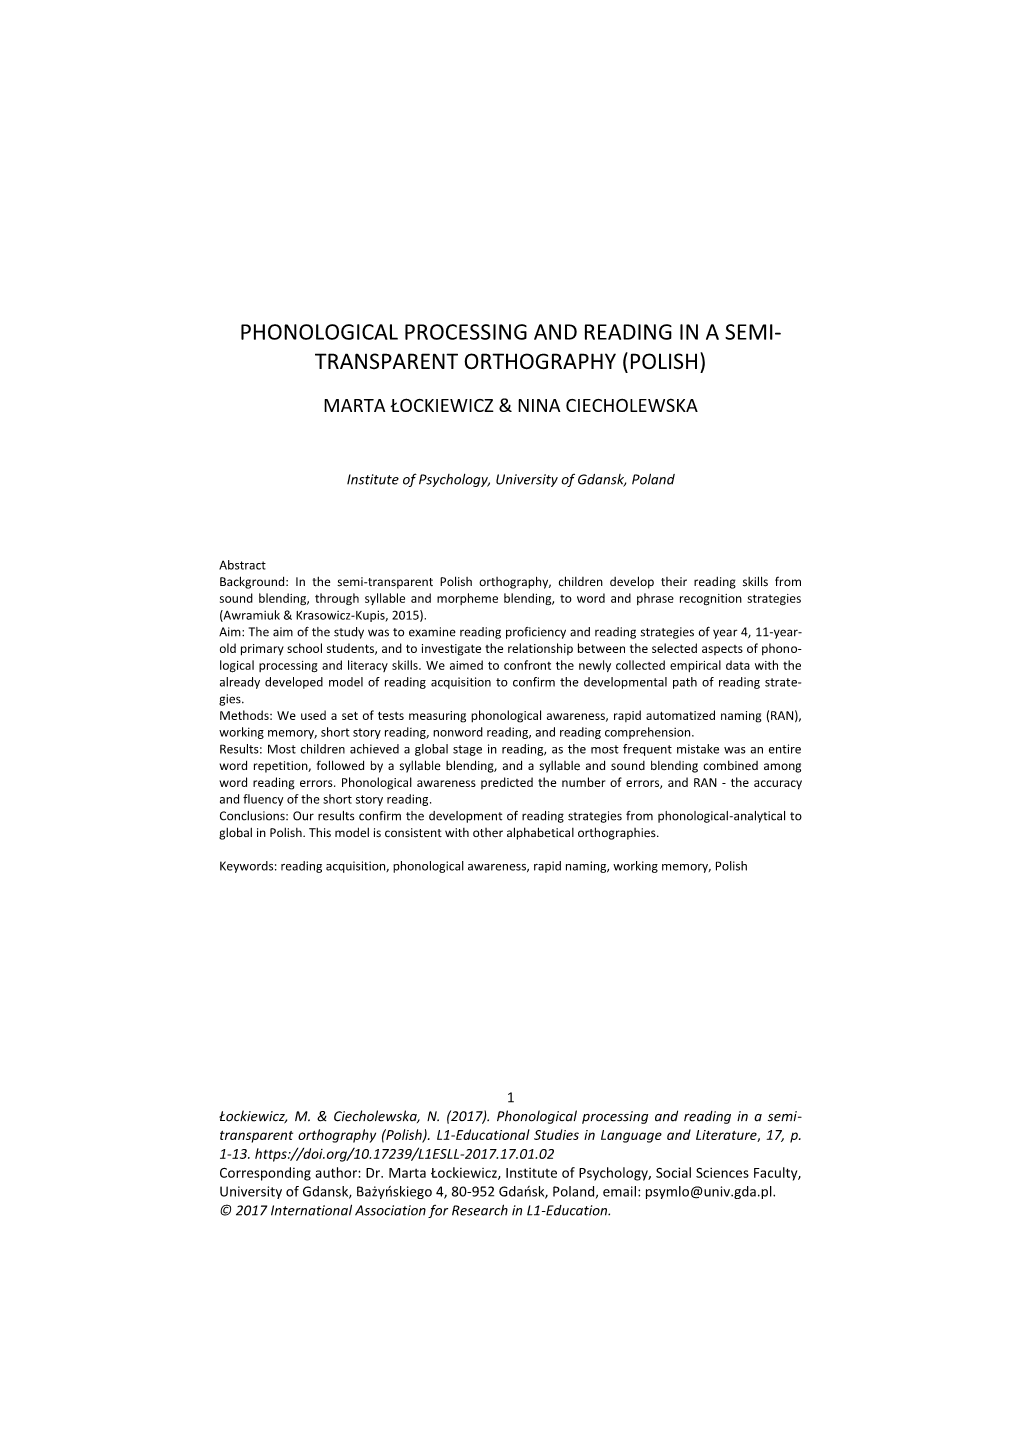 Phonological Processing and Reading in a Semi- Transparent Orthography (Polish)